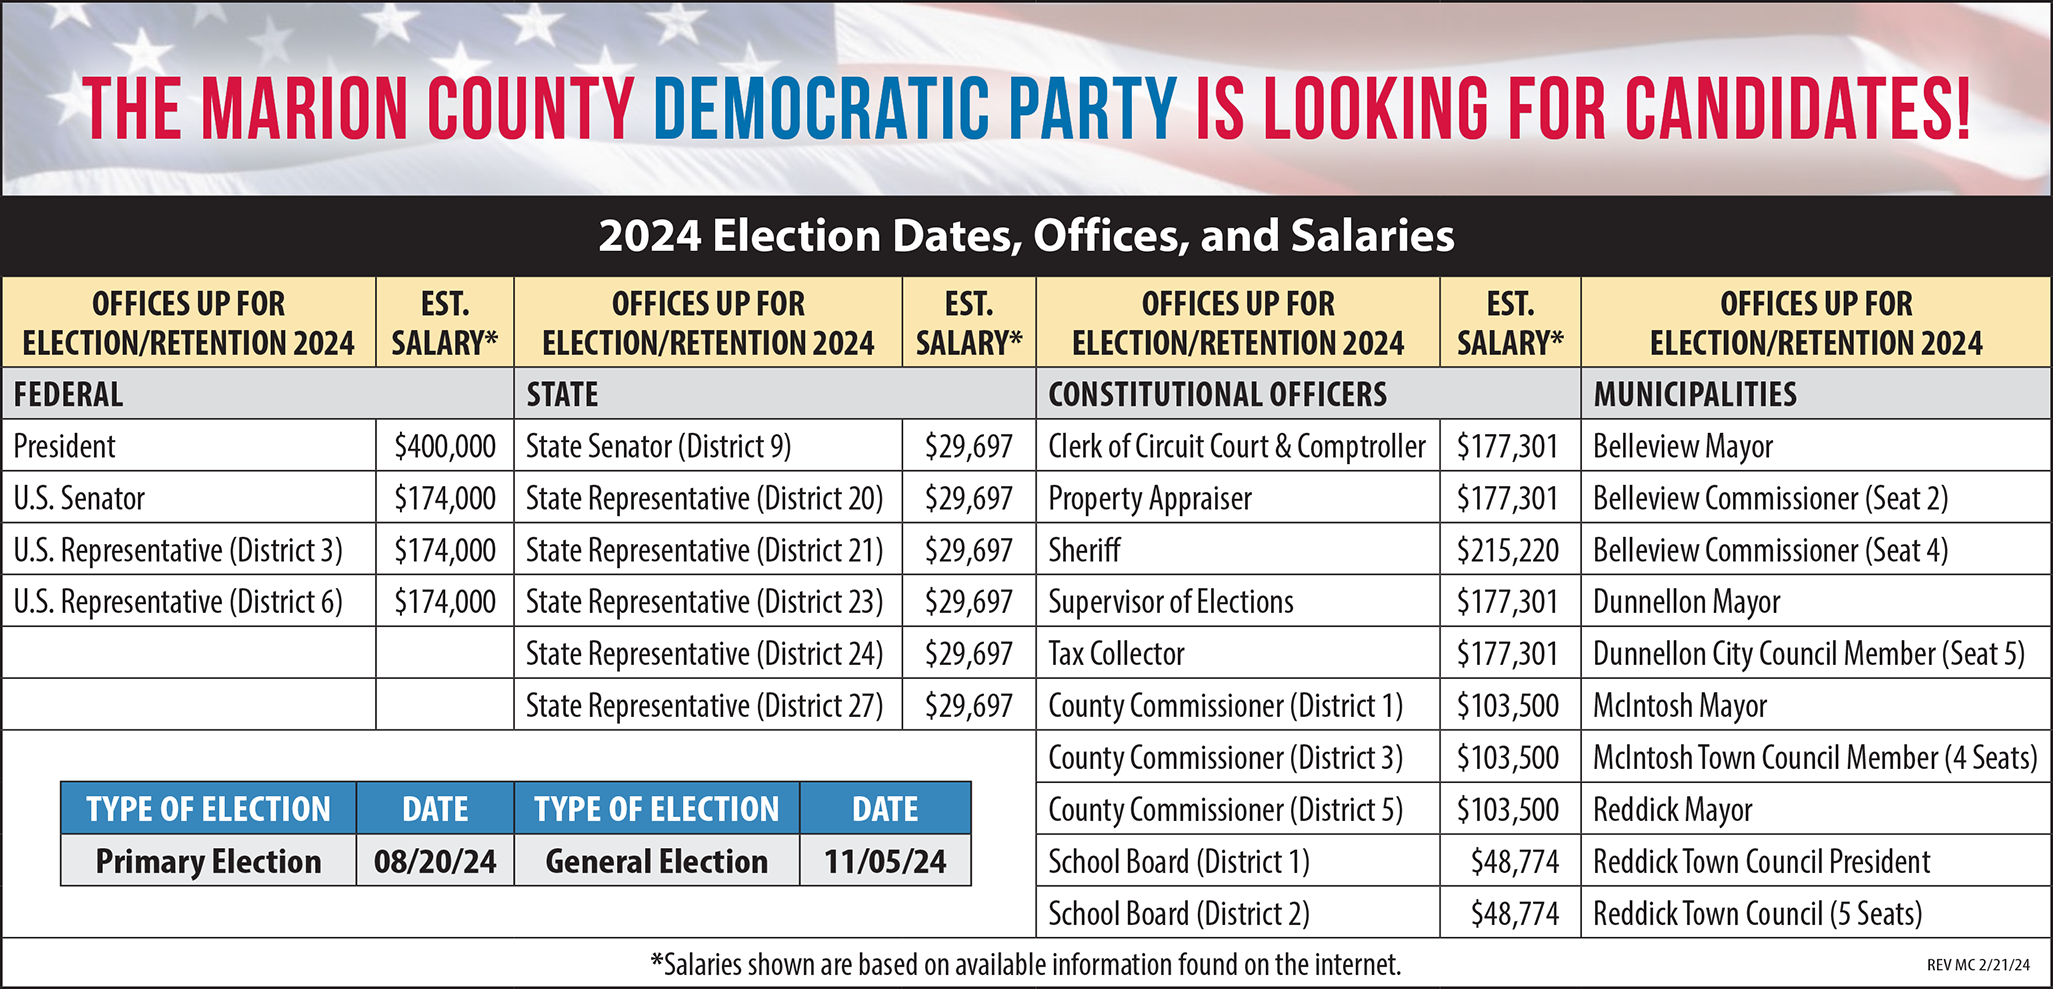 The Marion County Democratic Party is Looking for 2024 Candidates!